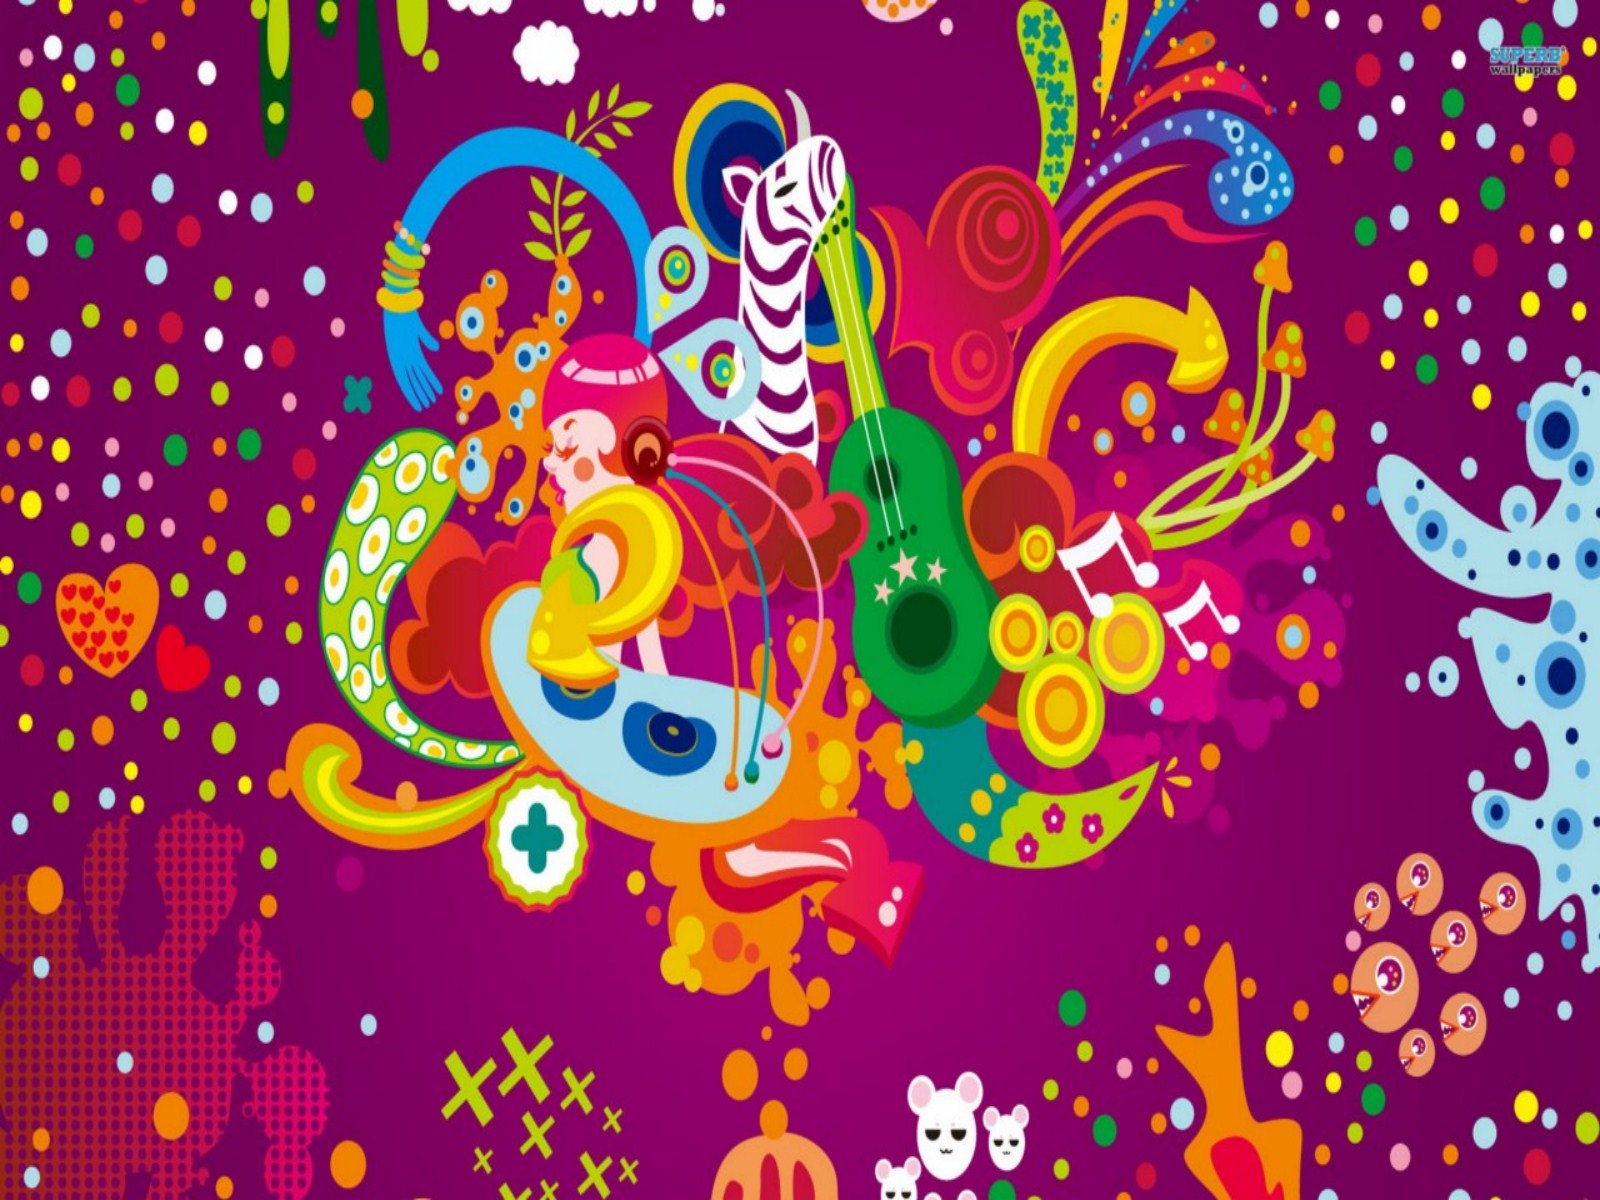 birthday party wallpaper,psychedelic art,graphic design,art,font,visual arts